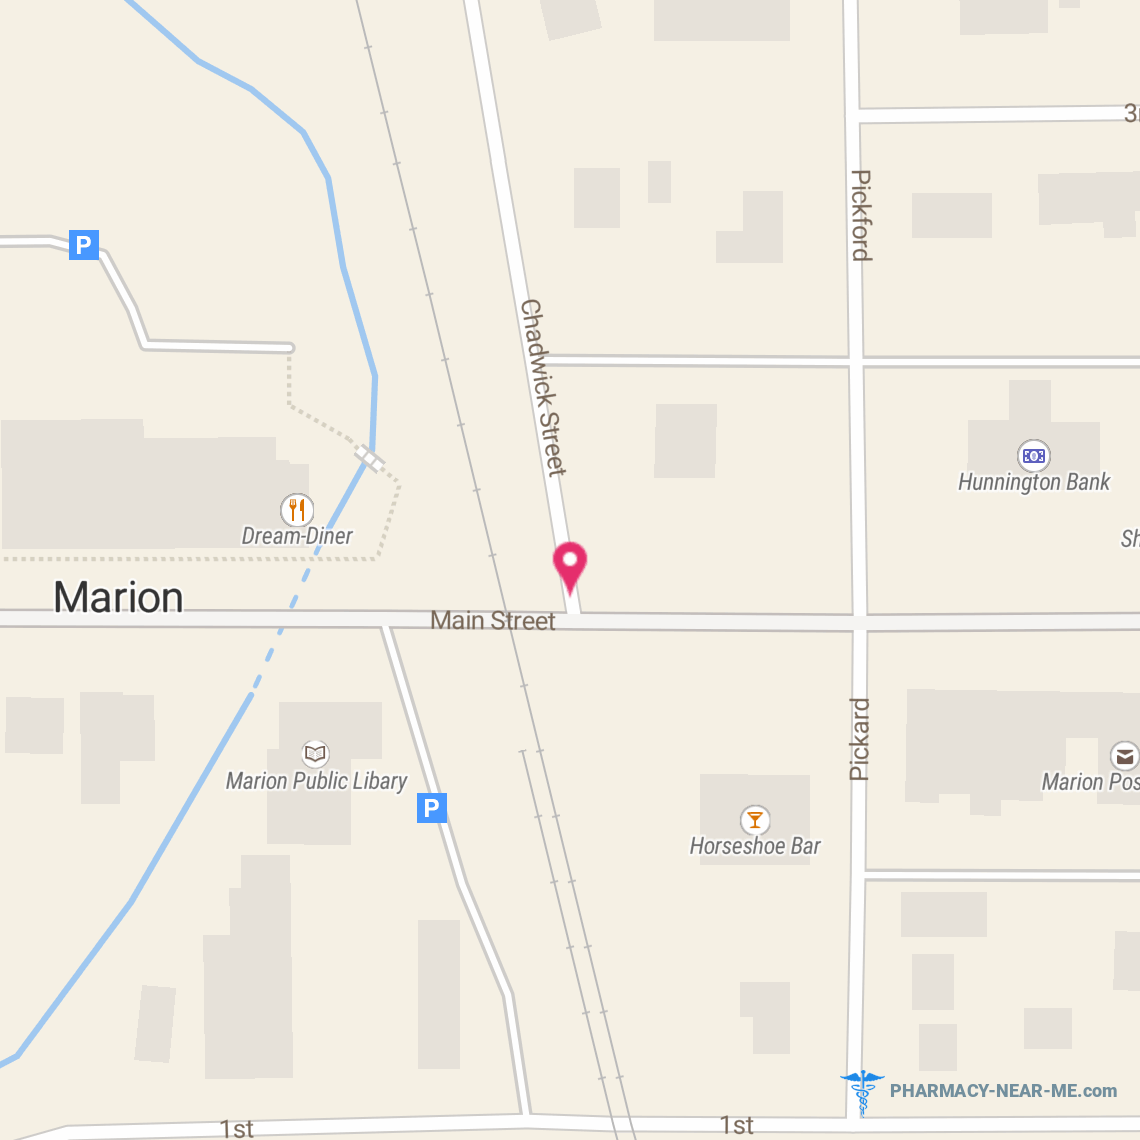 MARION PHARMACY - Pharmacy Hours, Phone, Reviews & Information: 103 E Main St, Marion, Michigan 49665, United States